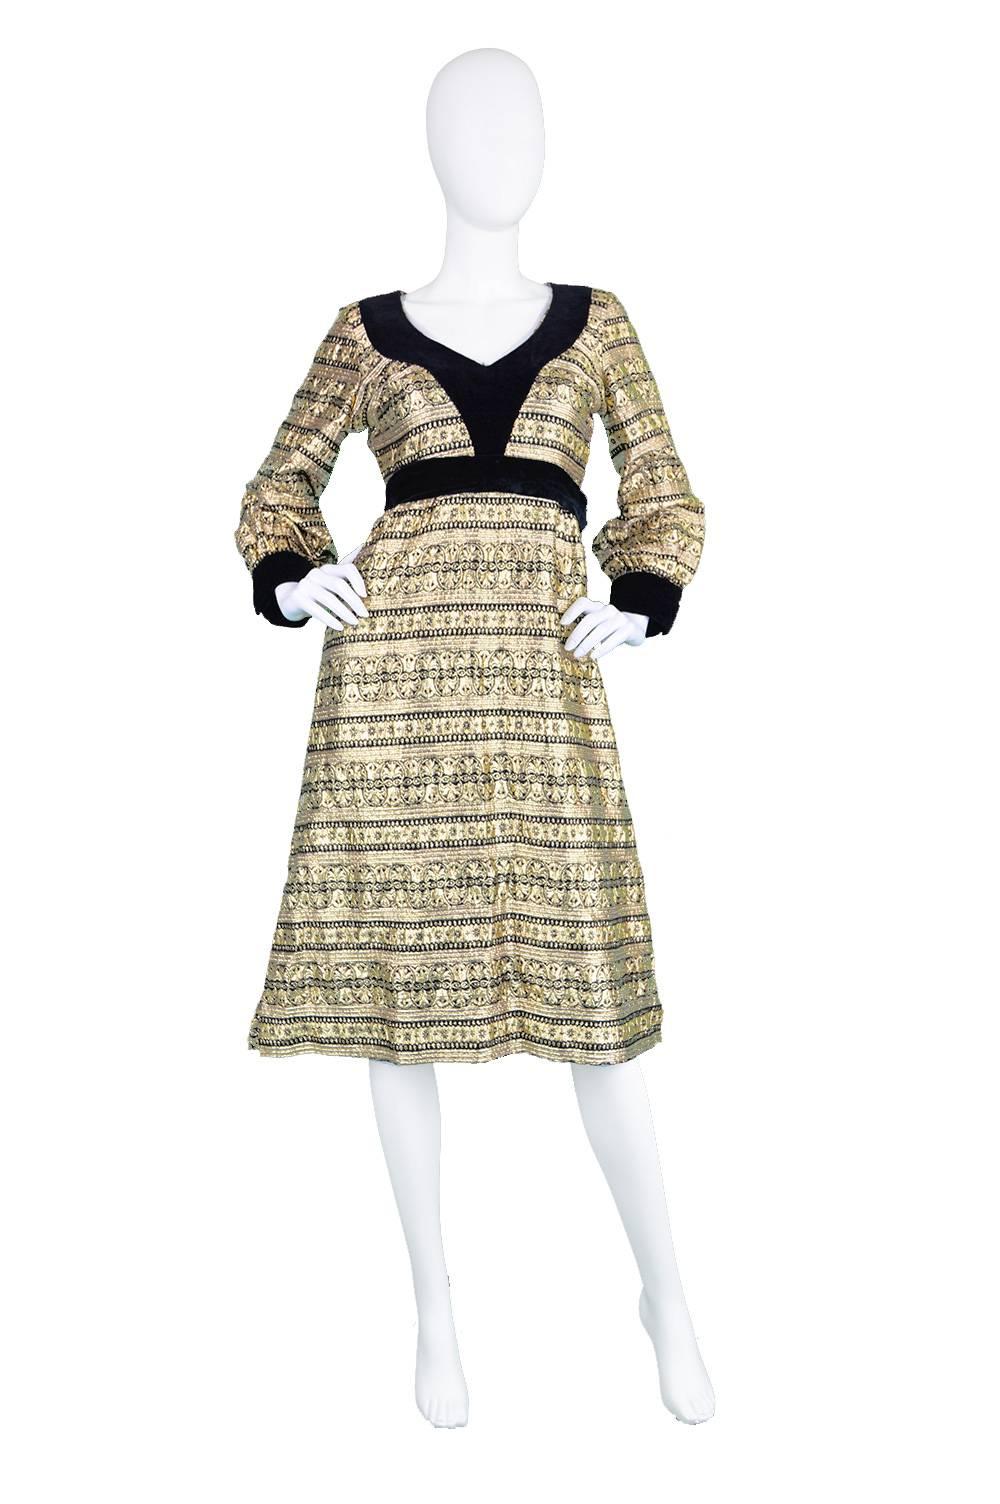 An incredibly elegant vintage dress from the 1970's by genius and increasingly collectible vintage designer, Jean Varon (Who was also known as John Bates). In a shimmering gold lamé fabric with a brocade pattern throughout, this dress really